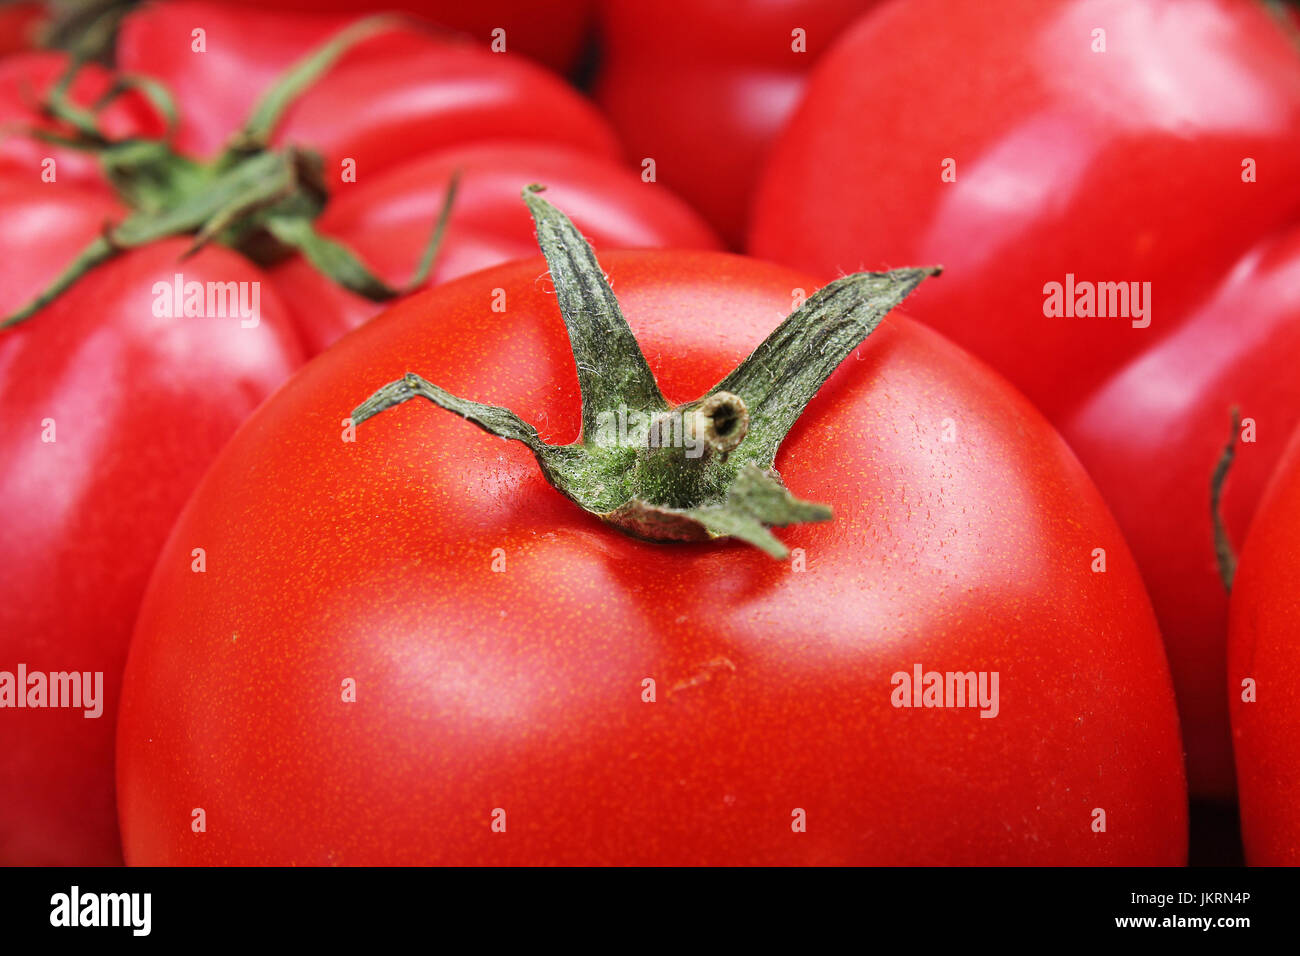 Tomato texture. Fresh big red tomatoes closeup background photo. Pile of tomatoes. Tomato pattern with studio lights. Stock Photo